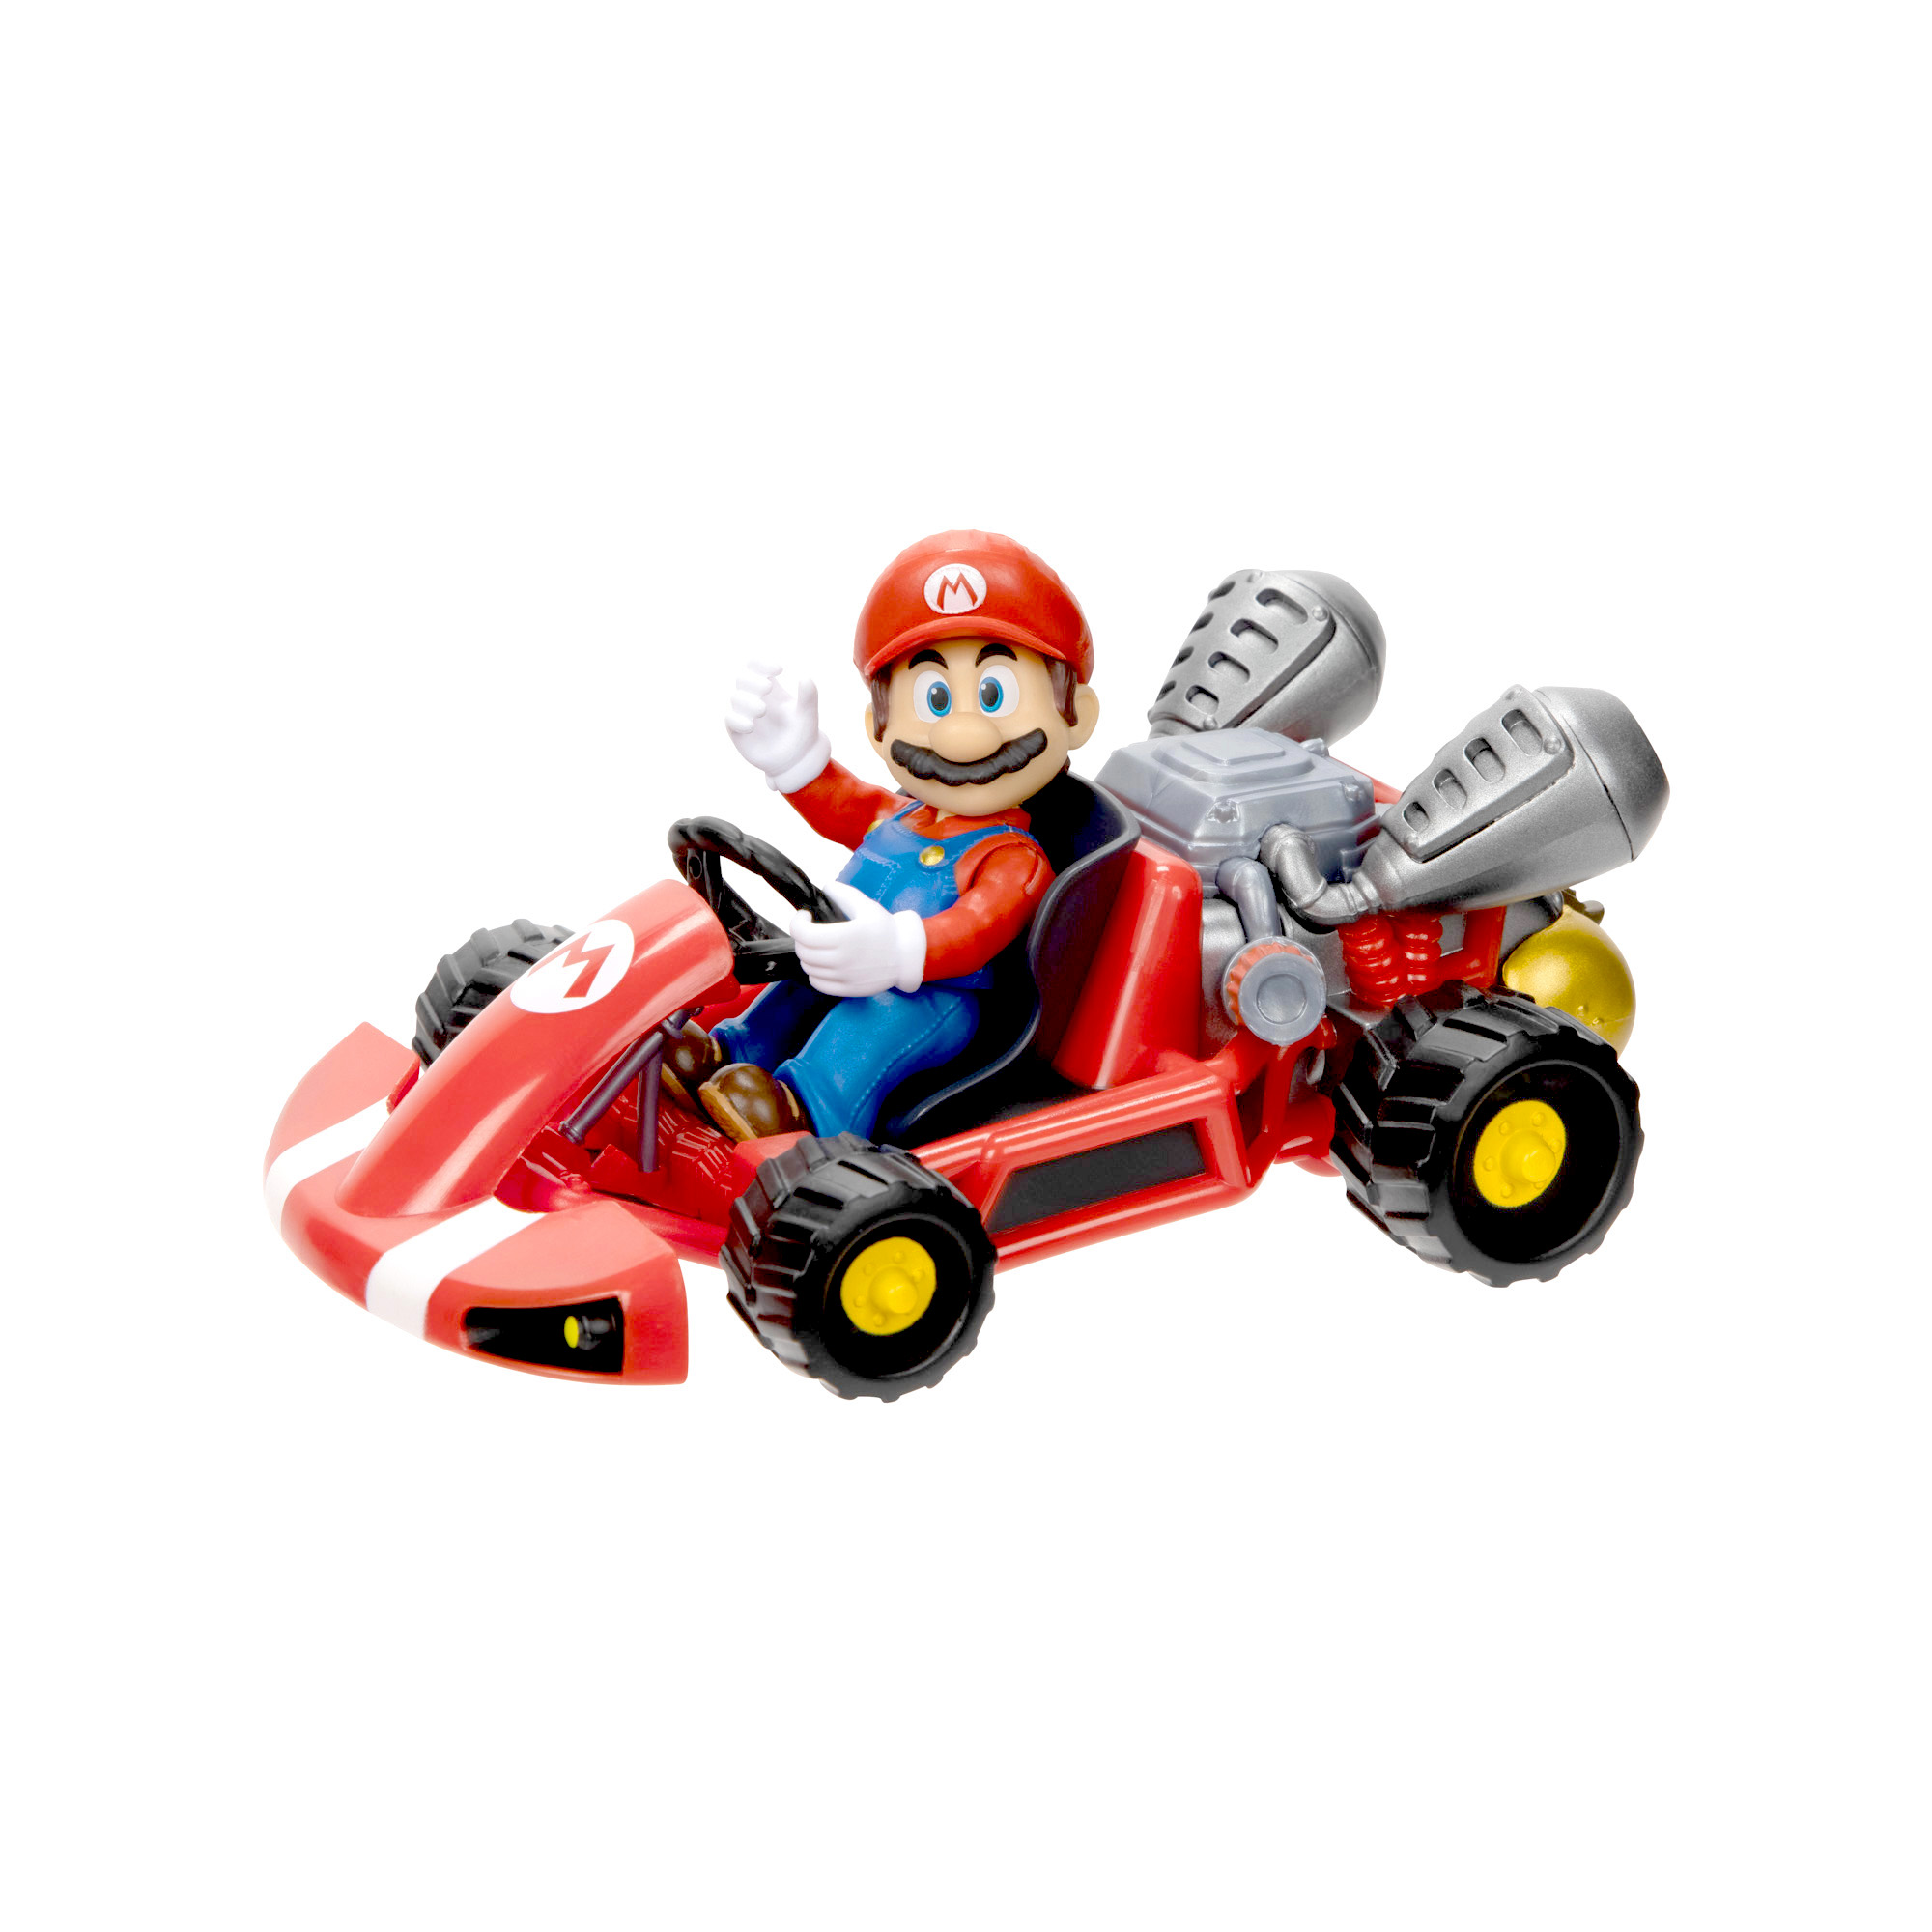 2.5” Mario Figure with Pull Back Racer